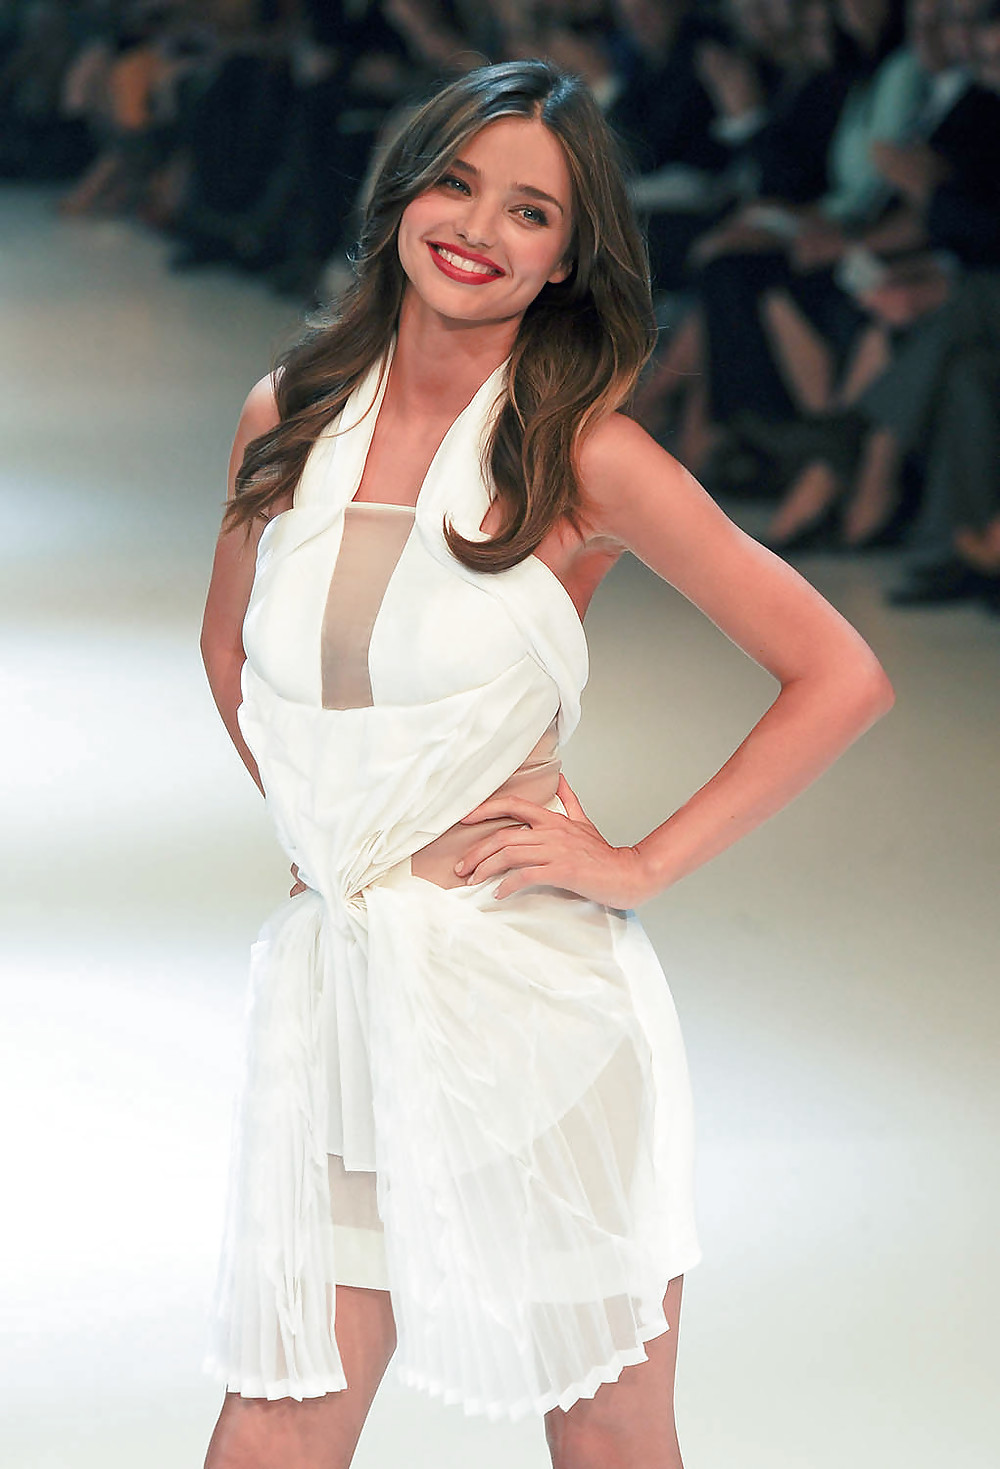 Miranda Kerr Back on The Runway with Her New Boobs #8111148